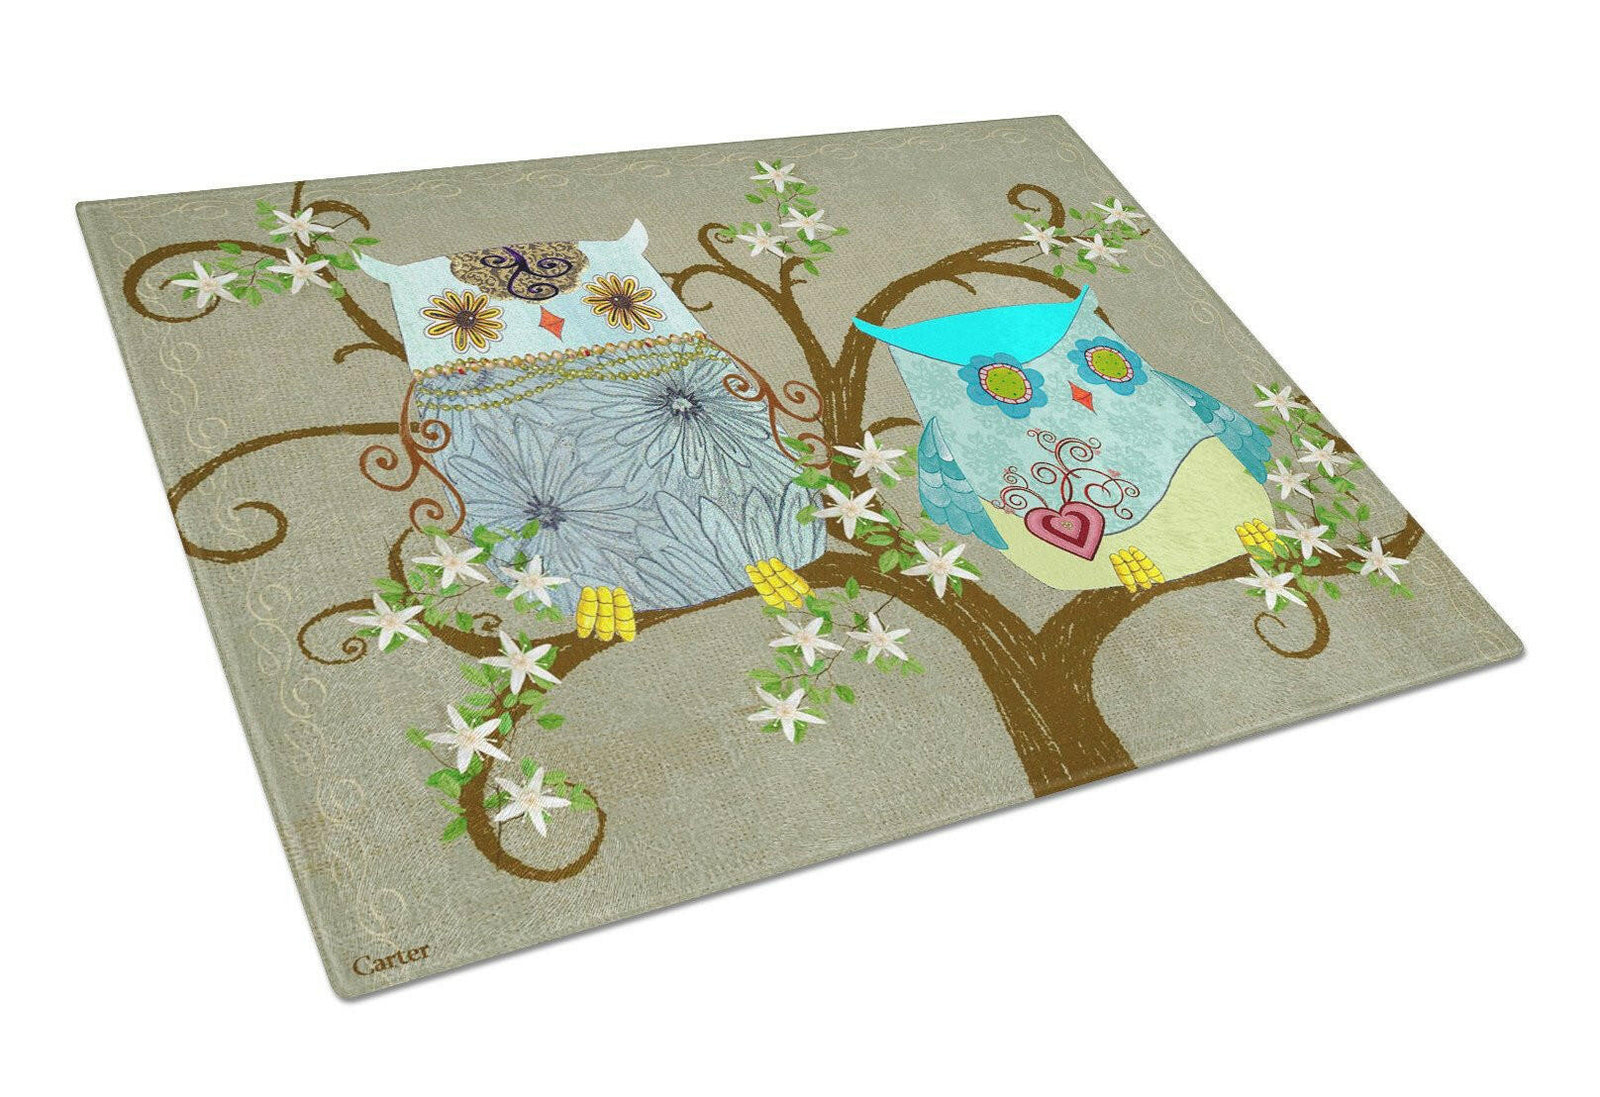 The Friendly Ladies Owl Glass Cutting Board Large PJC1094LCB by Caroline's Treasures